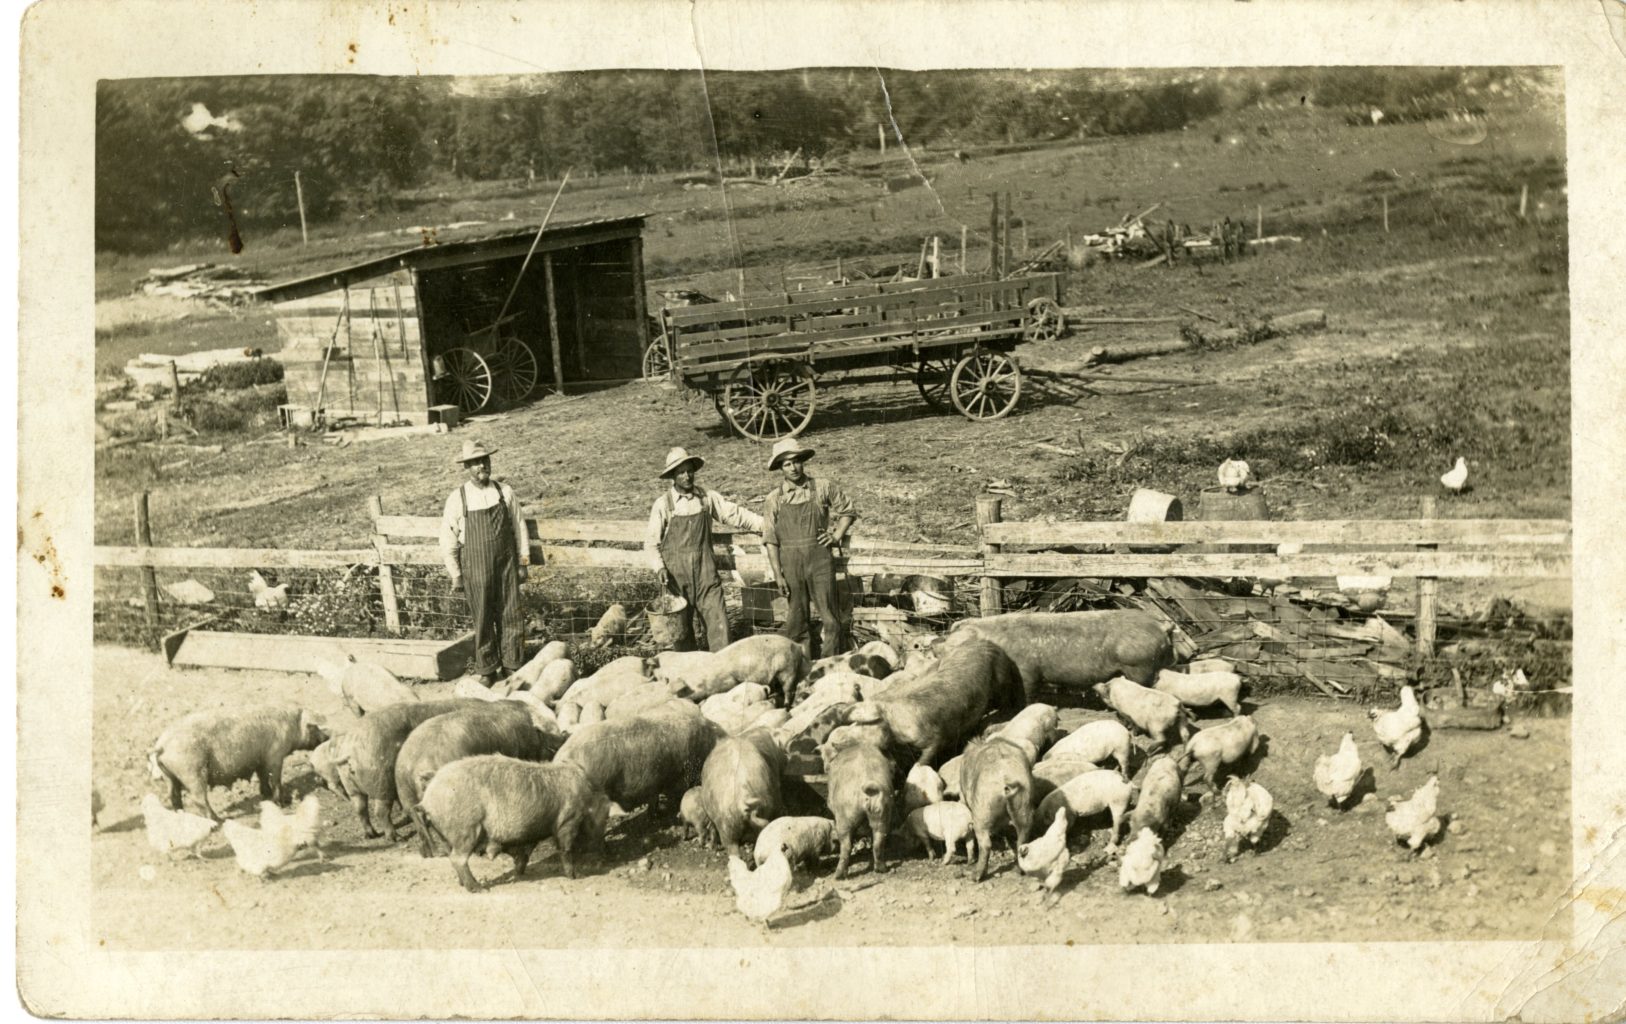 Three men with pigs and chickens on a farm.